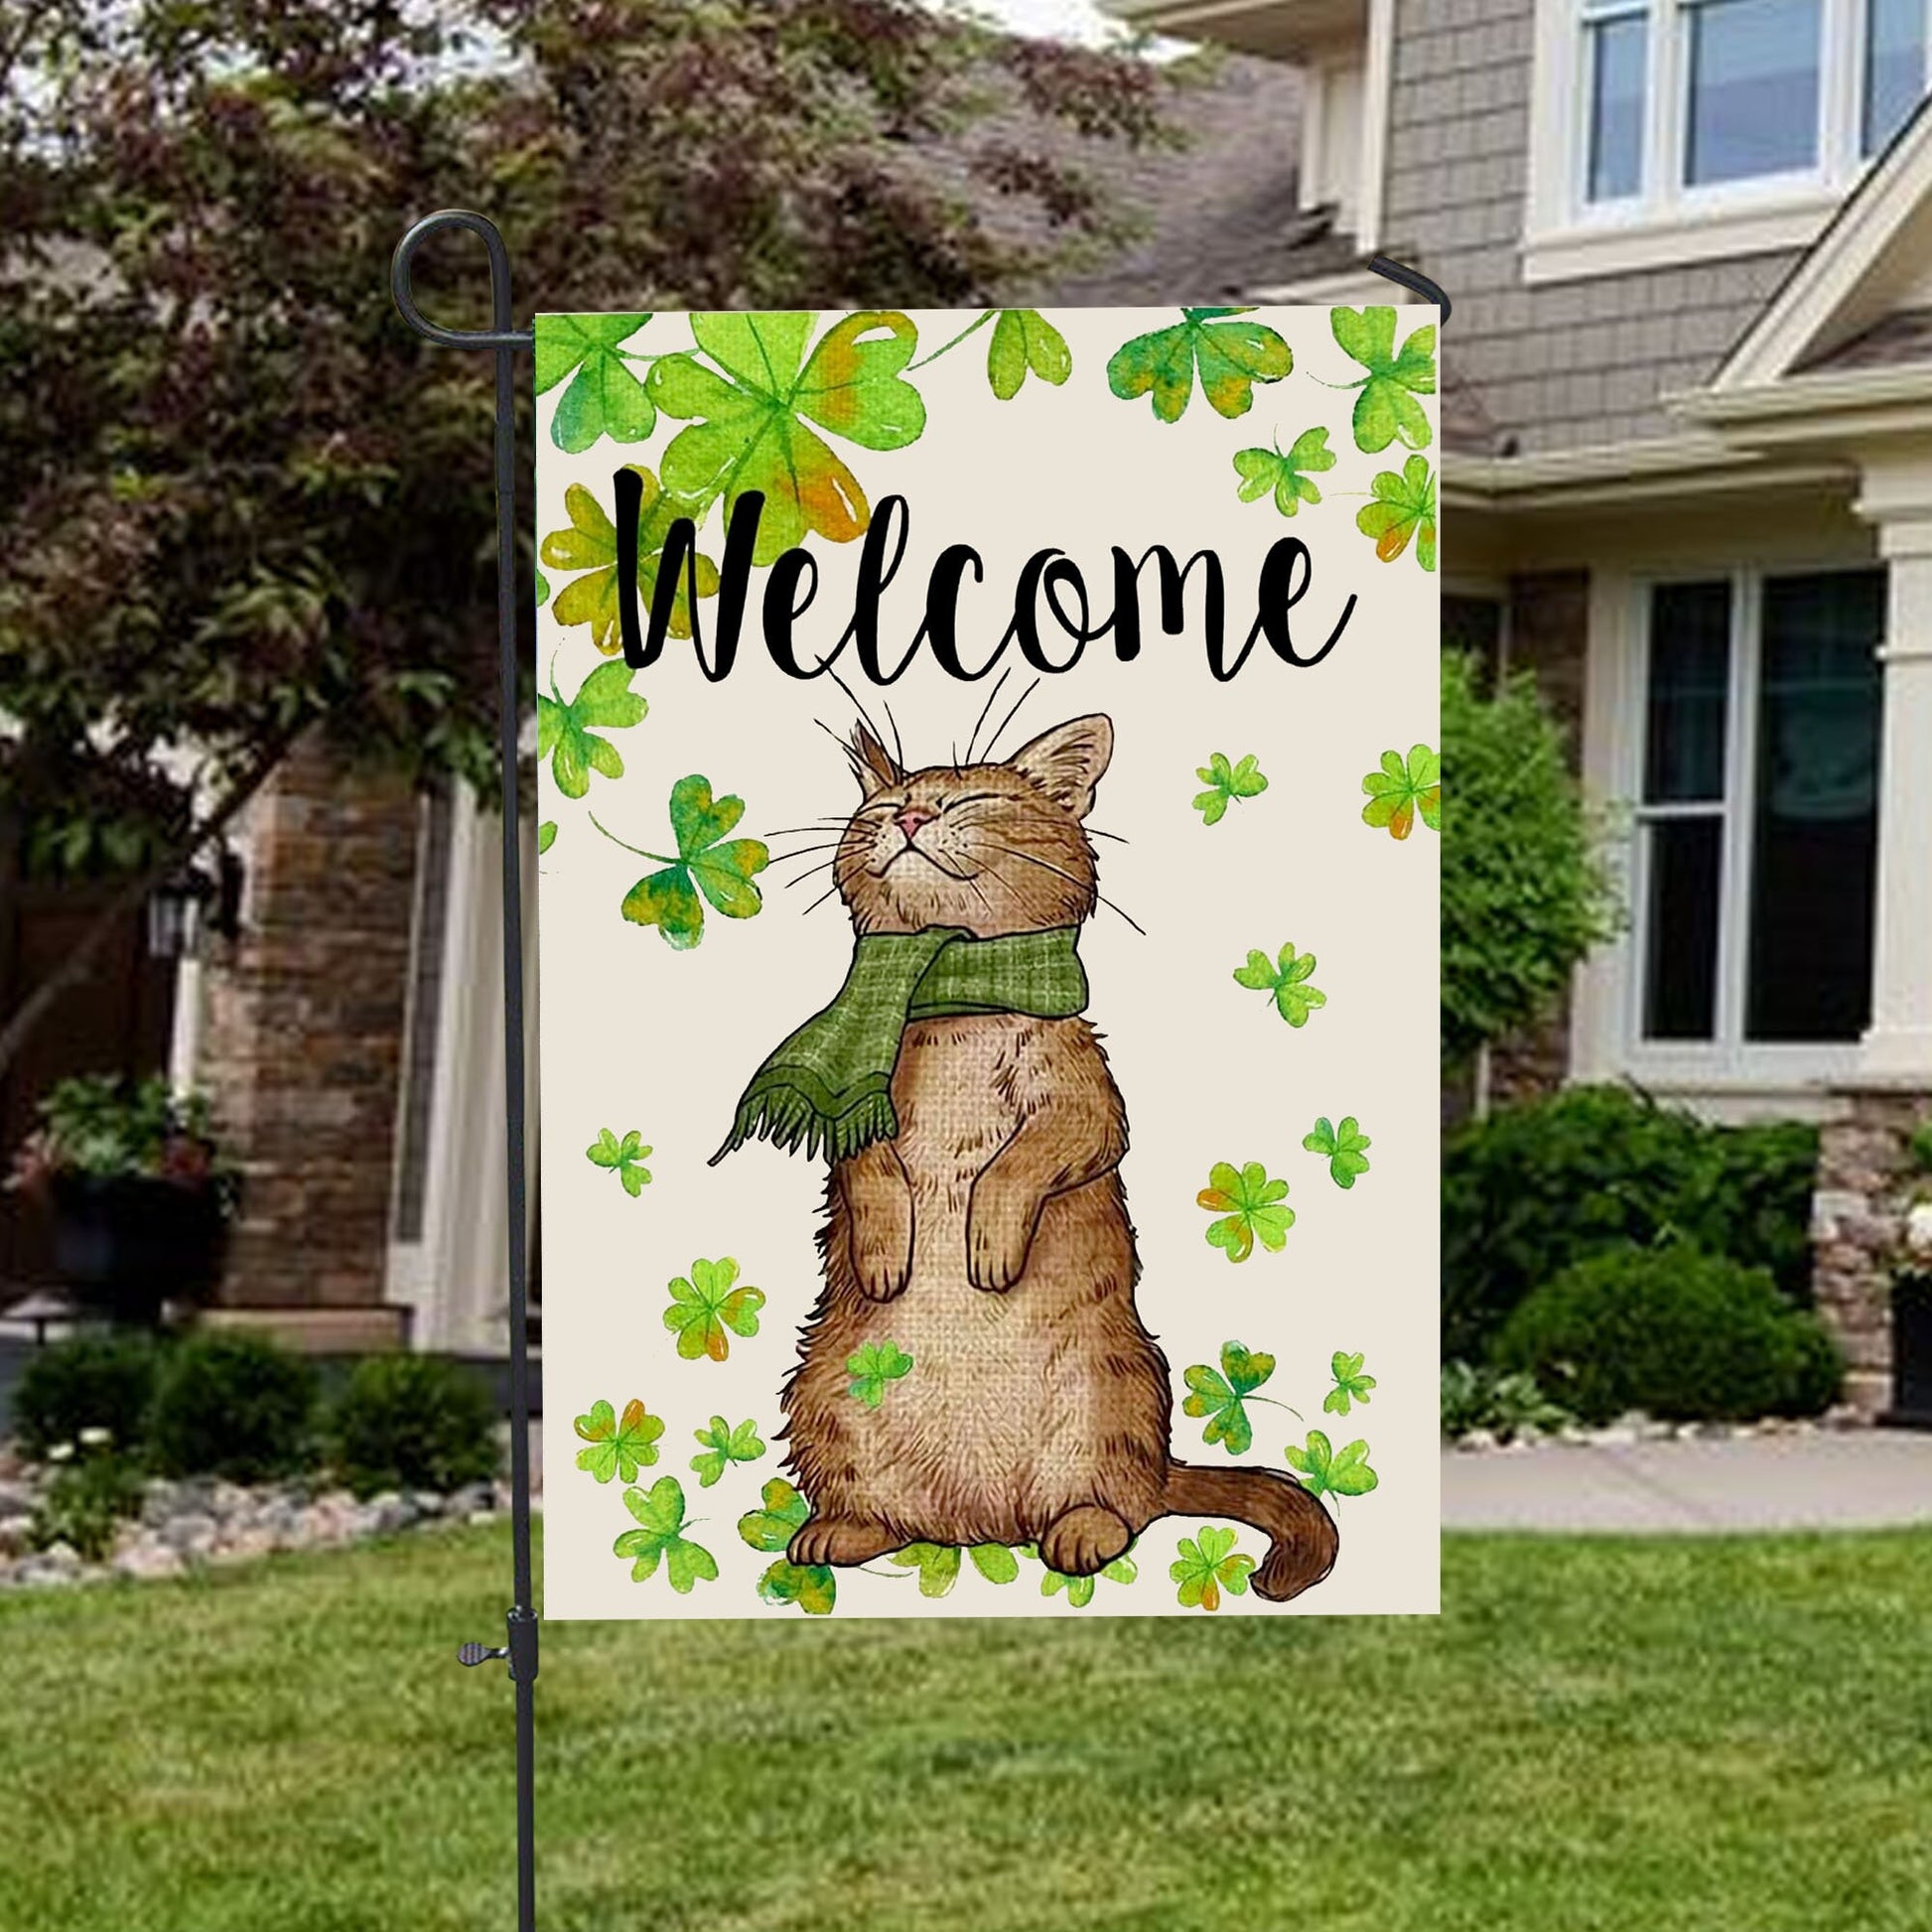 St. Patricks Day Welcome Cat And Shamrock Clover House Flag - St. Patrick's Day Garden Flag - Outdoor St Patrick's Day Decor